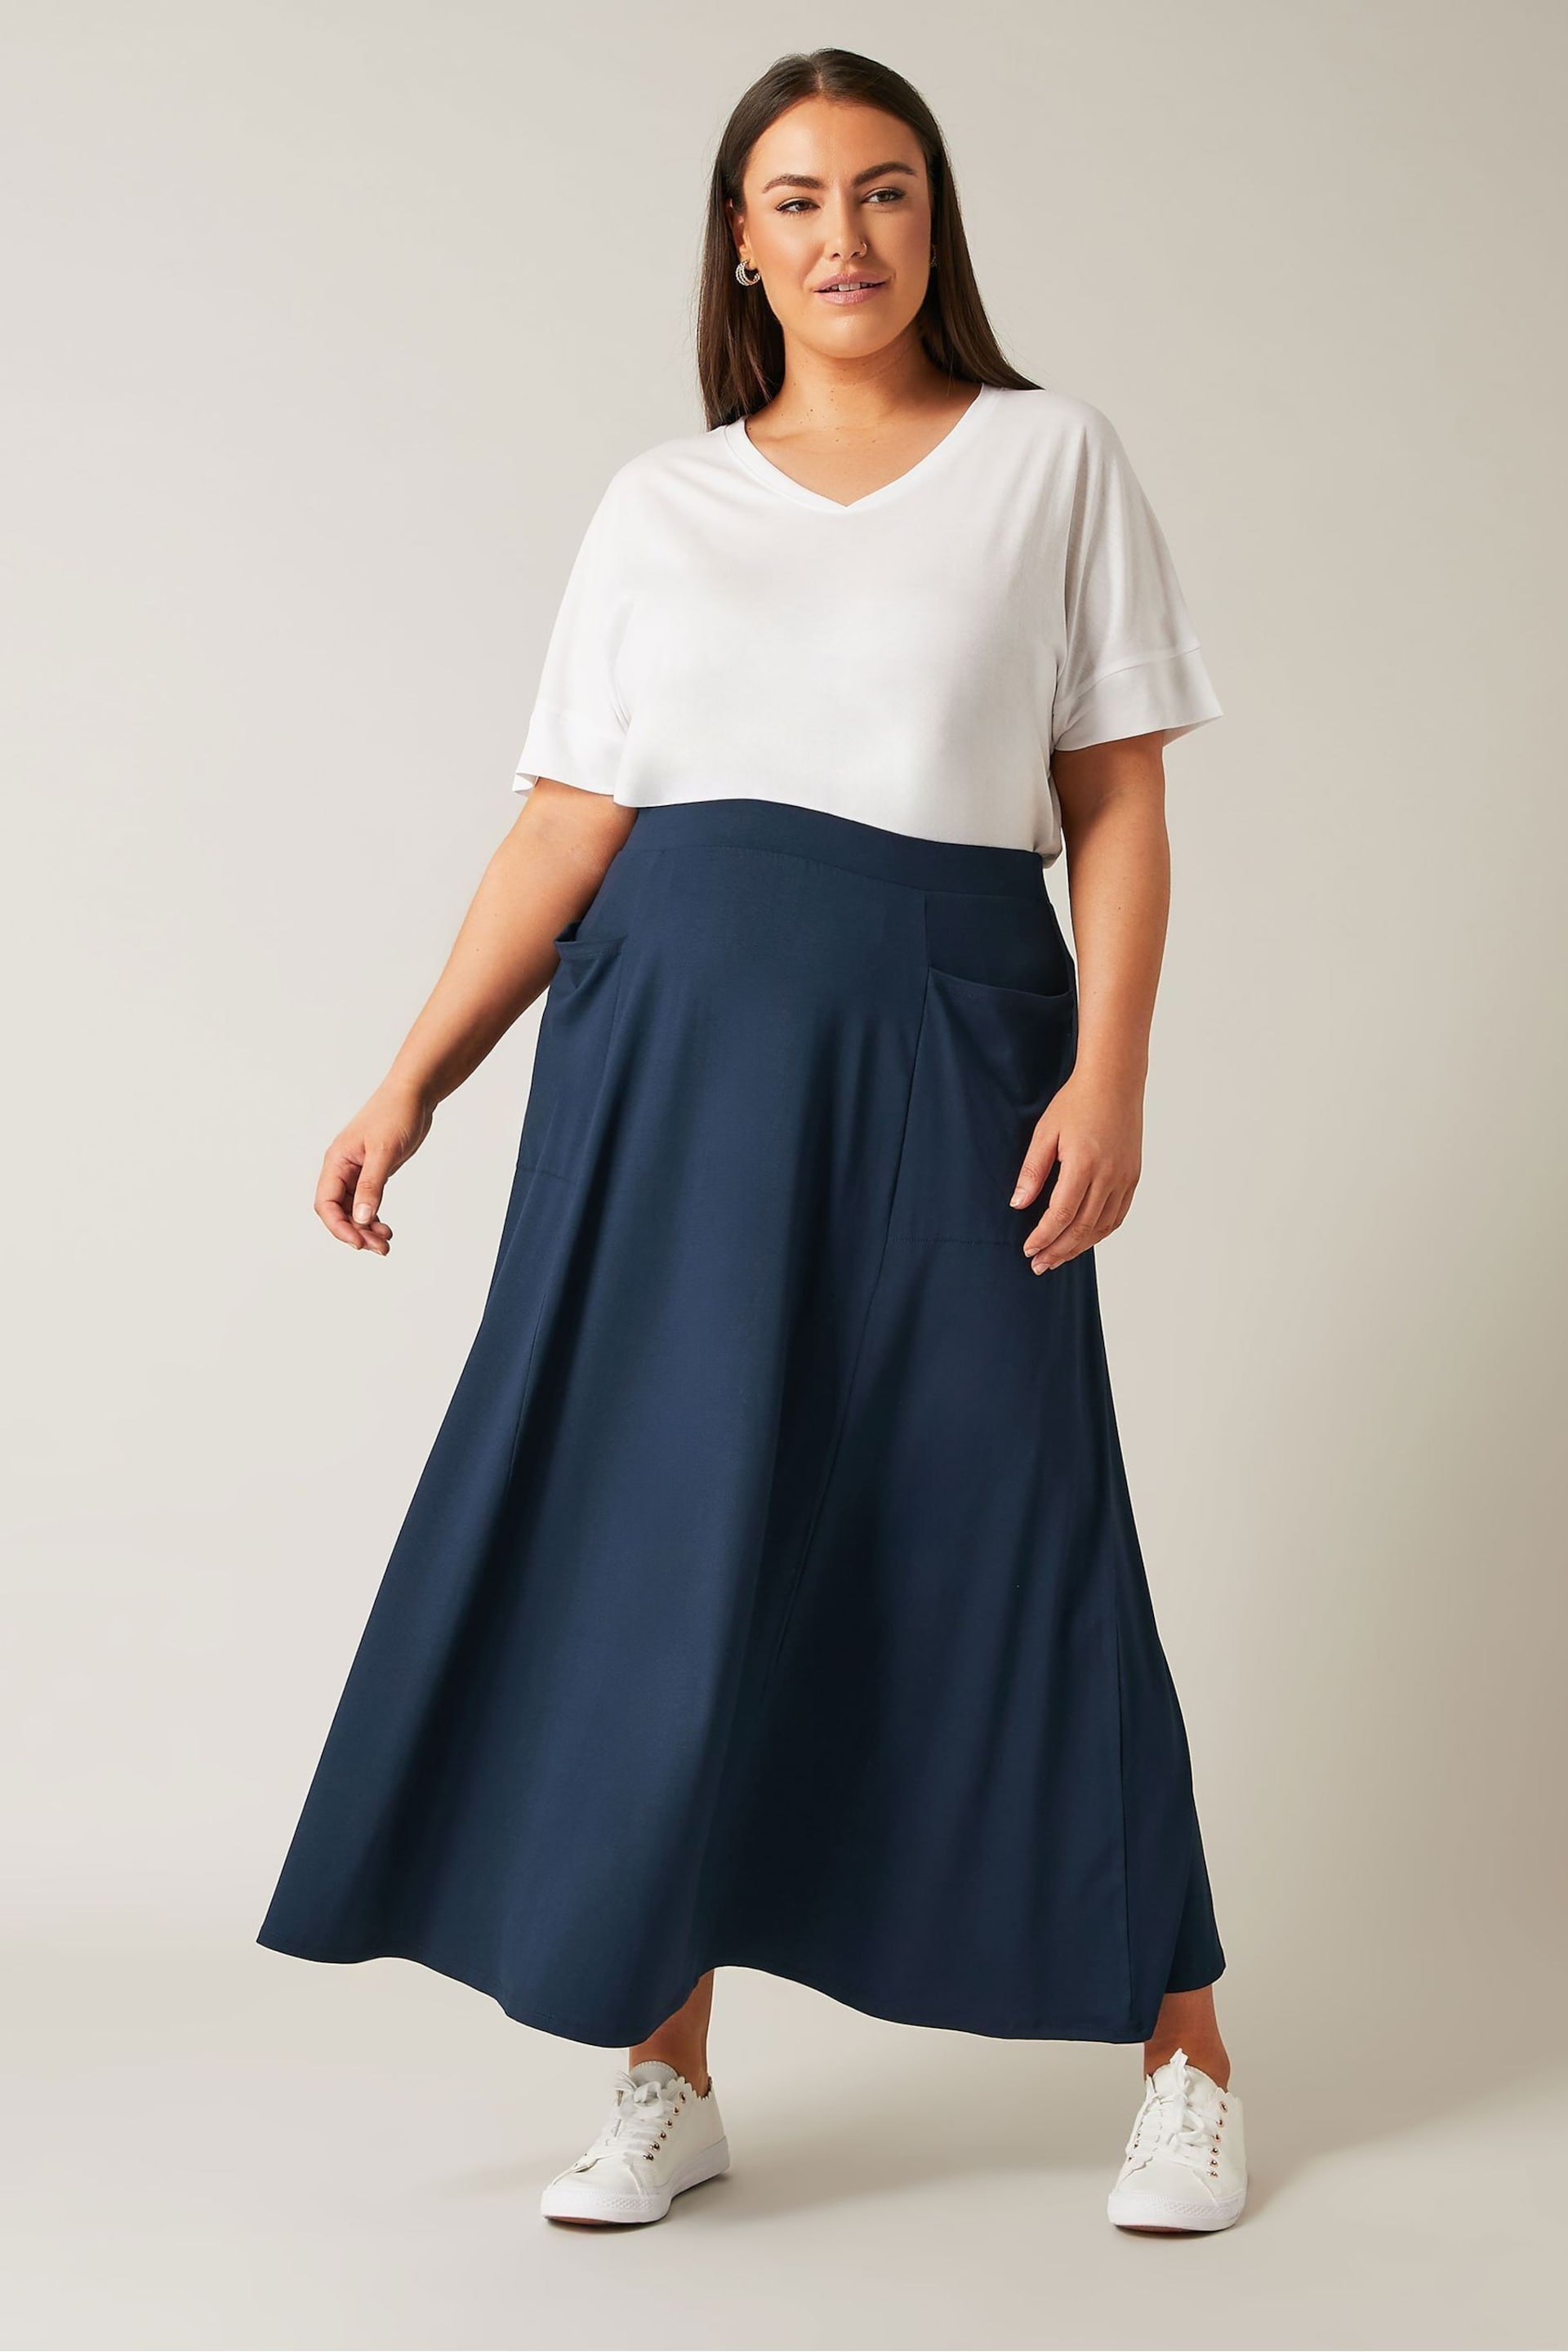 Evans Curve Maxi Skirt - Image 2 of 5